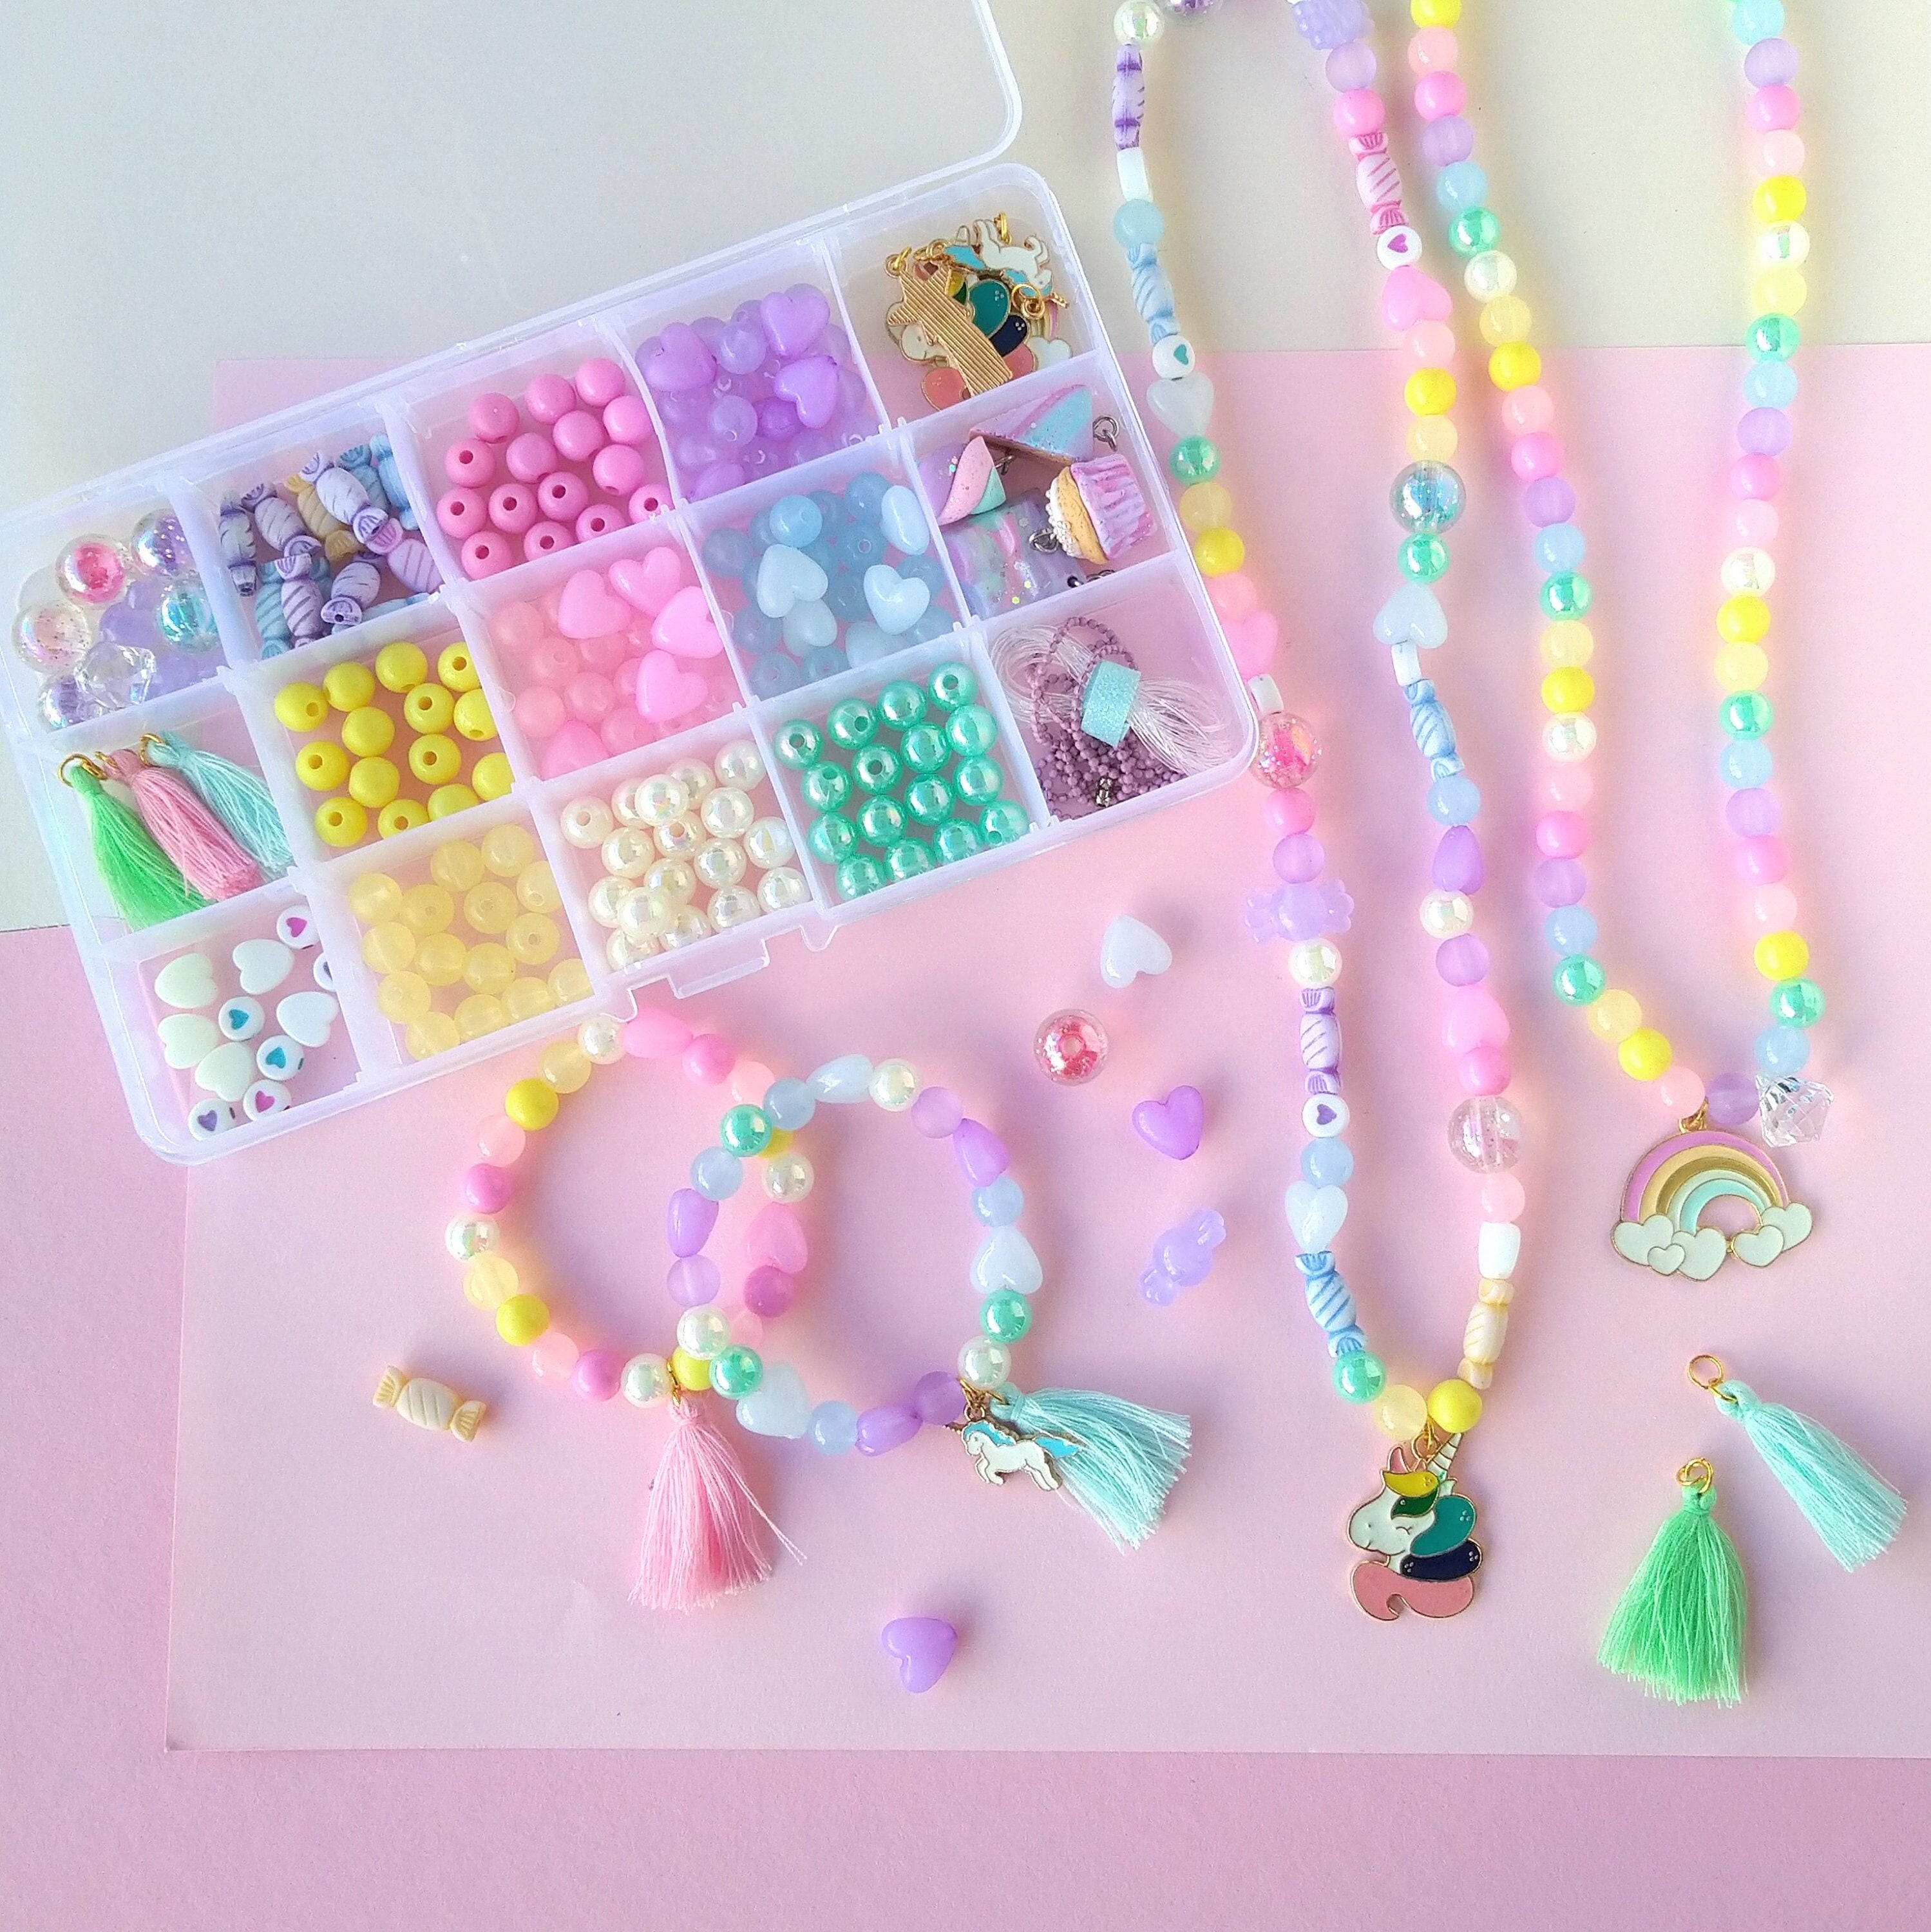 Charm Bracelet Making Kit - Unicorn Jewelry Making Kit for Girls 8-12 - Diy  Toys with Bracelets, Beads, Necklaces Crafts Set for Kids - Girl Gifts